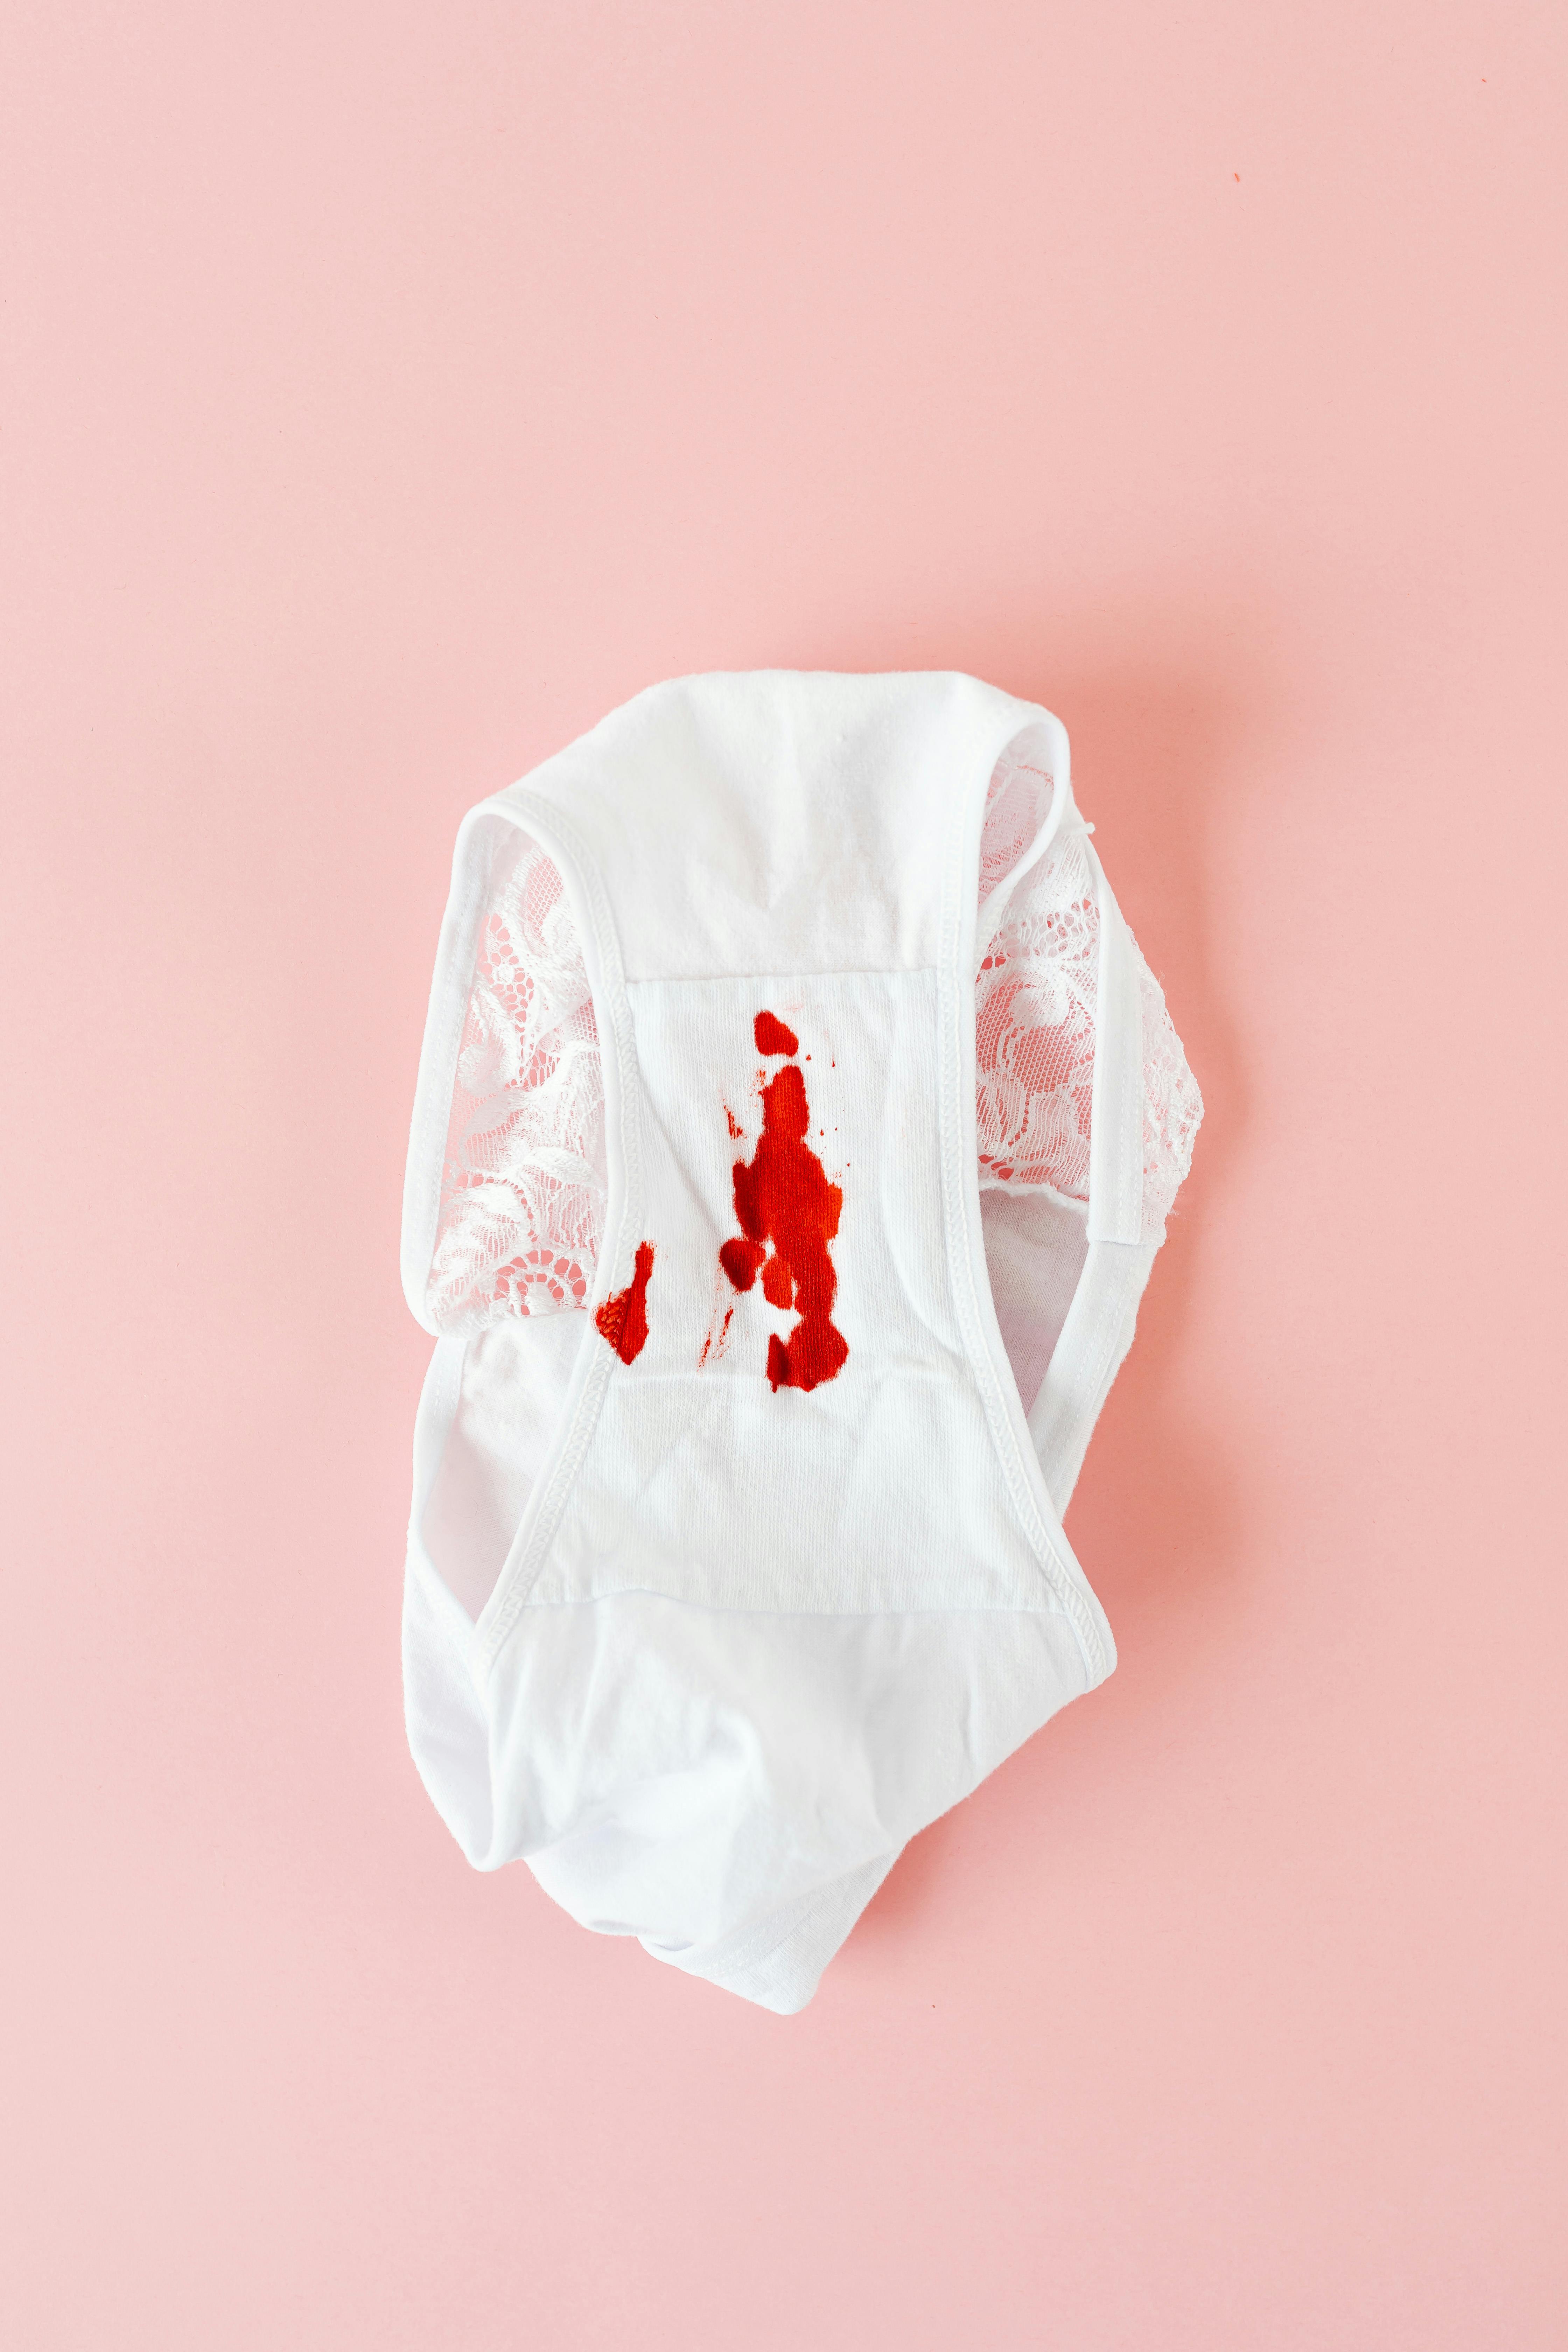 Woman With Panties With Period Blood Censored. Stock Photo, Picture and  Royalty Free Image. Image 141847760.